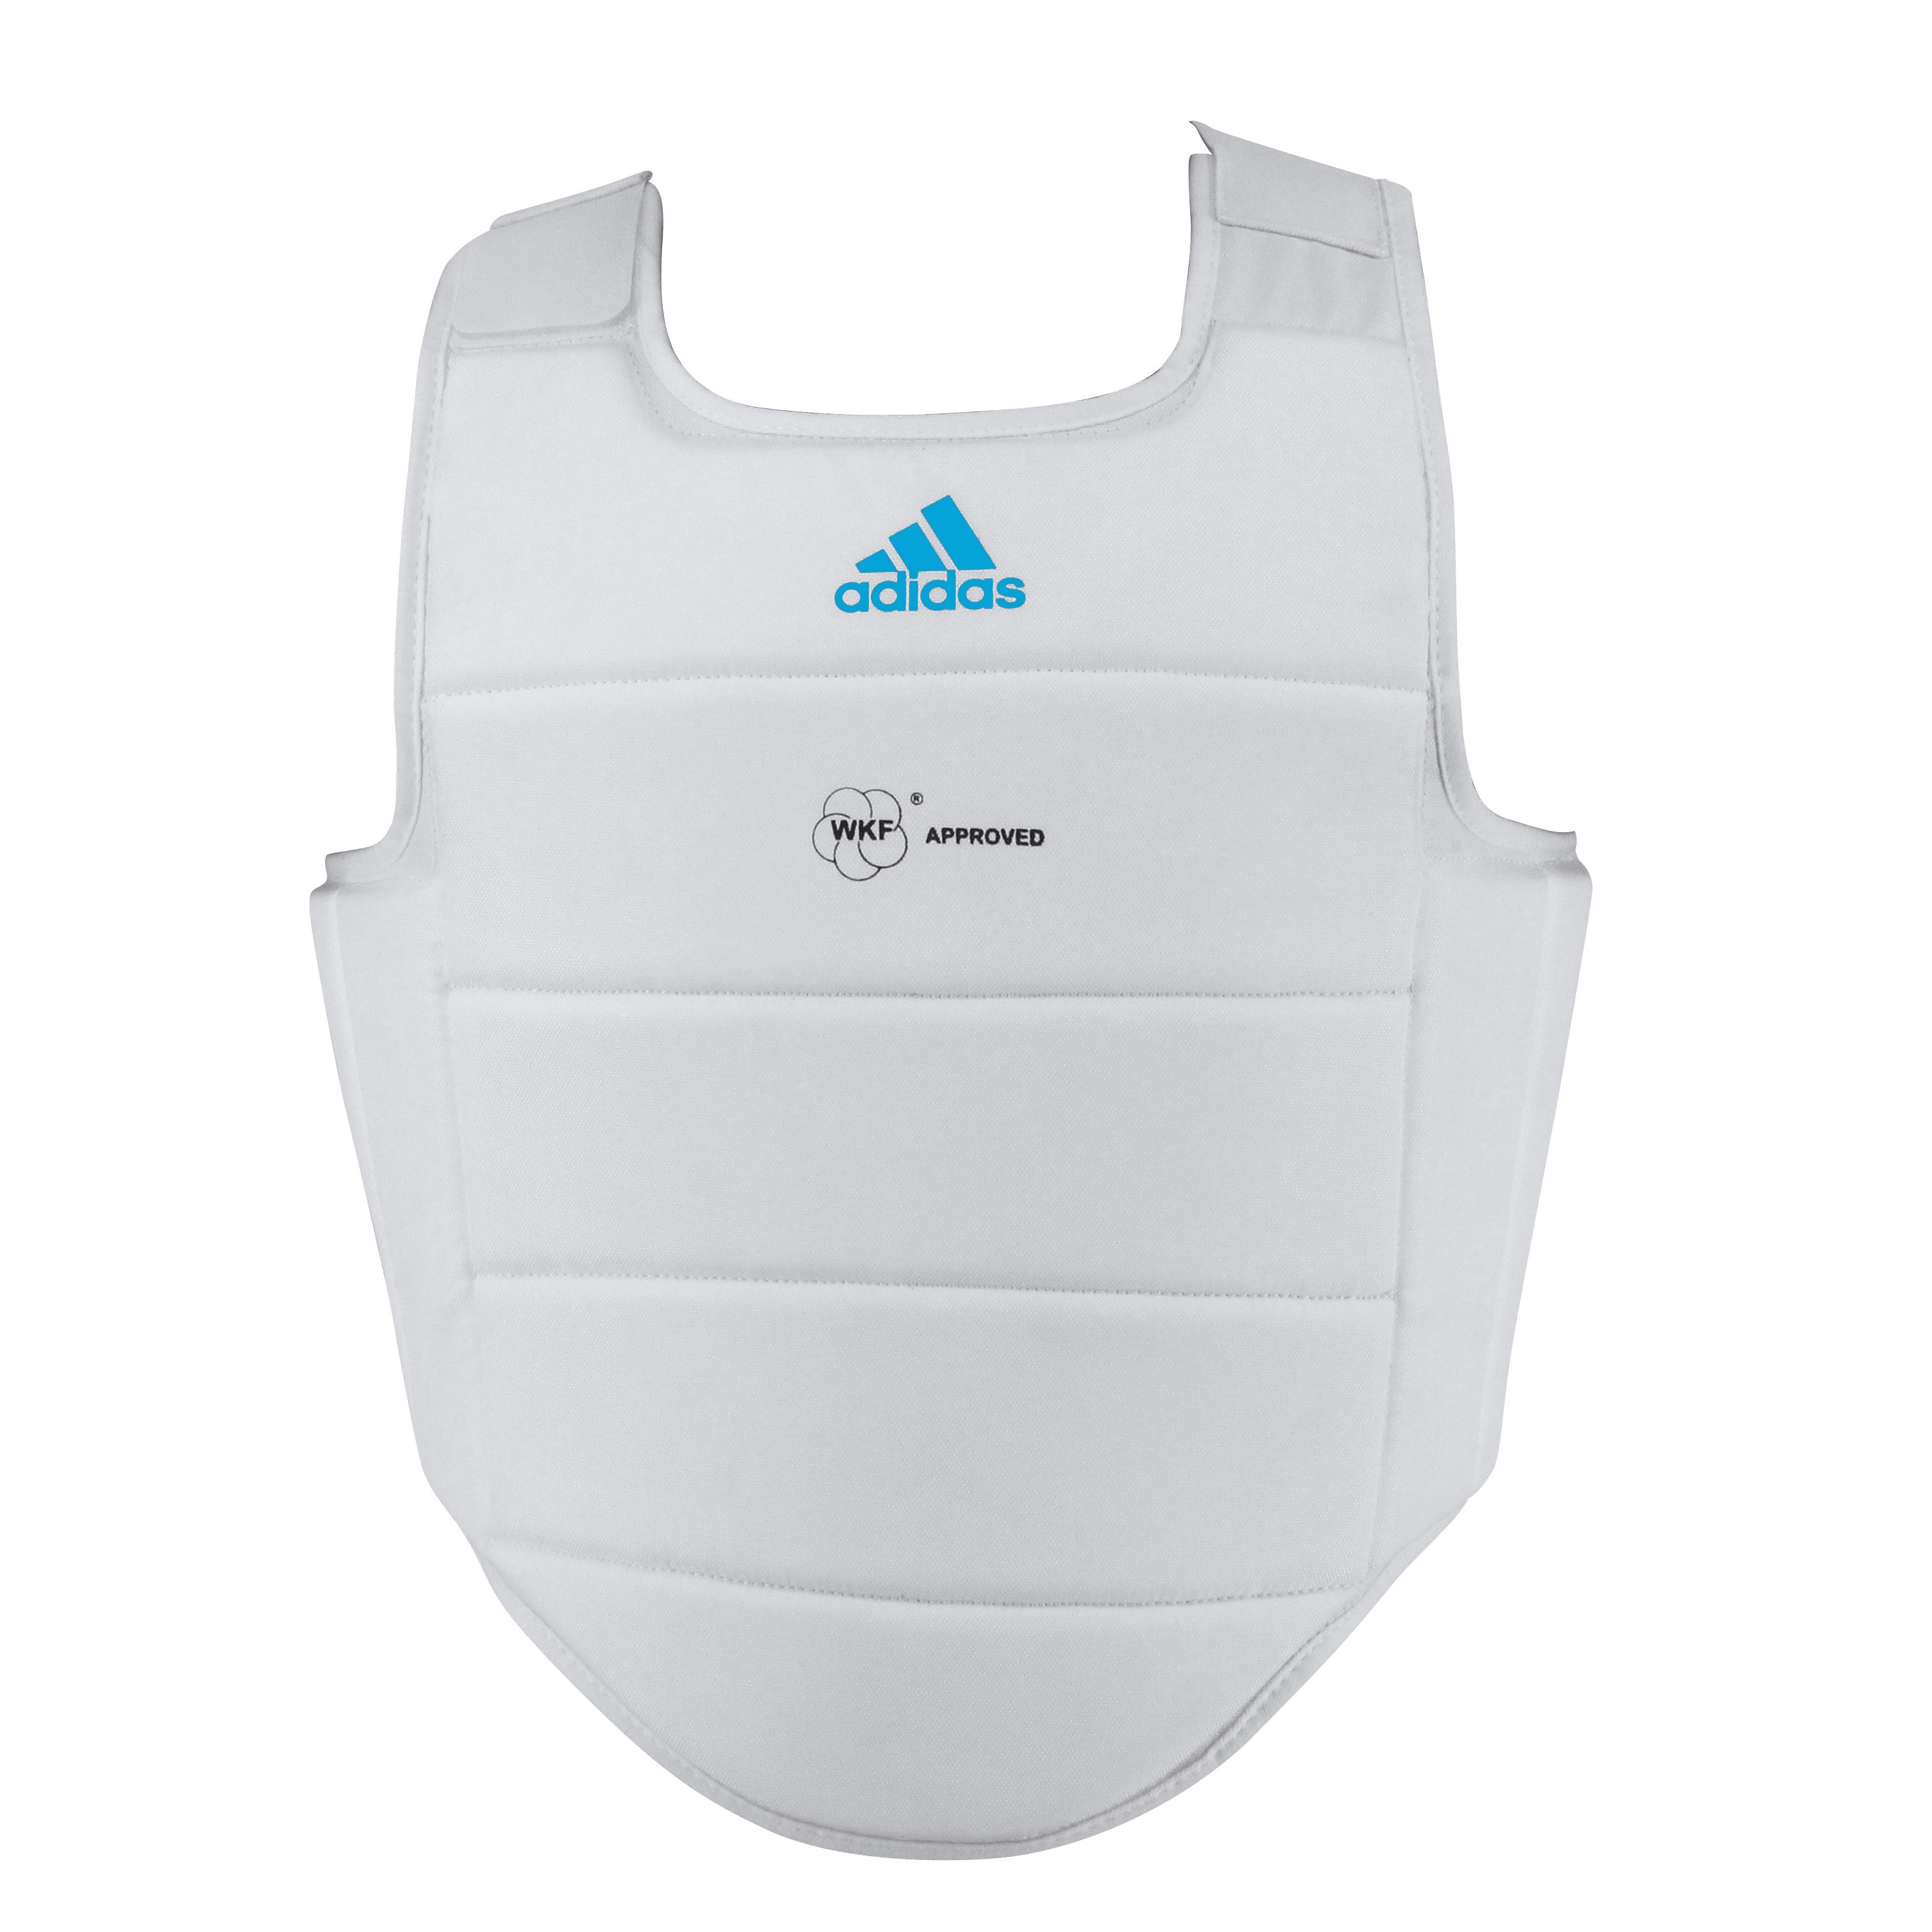 Adidas Karate WKF Approved BODY PROTECTOR